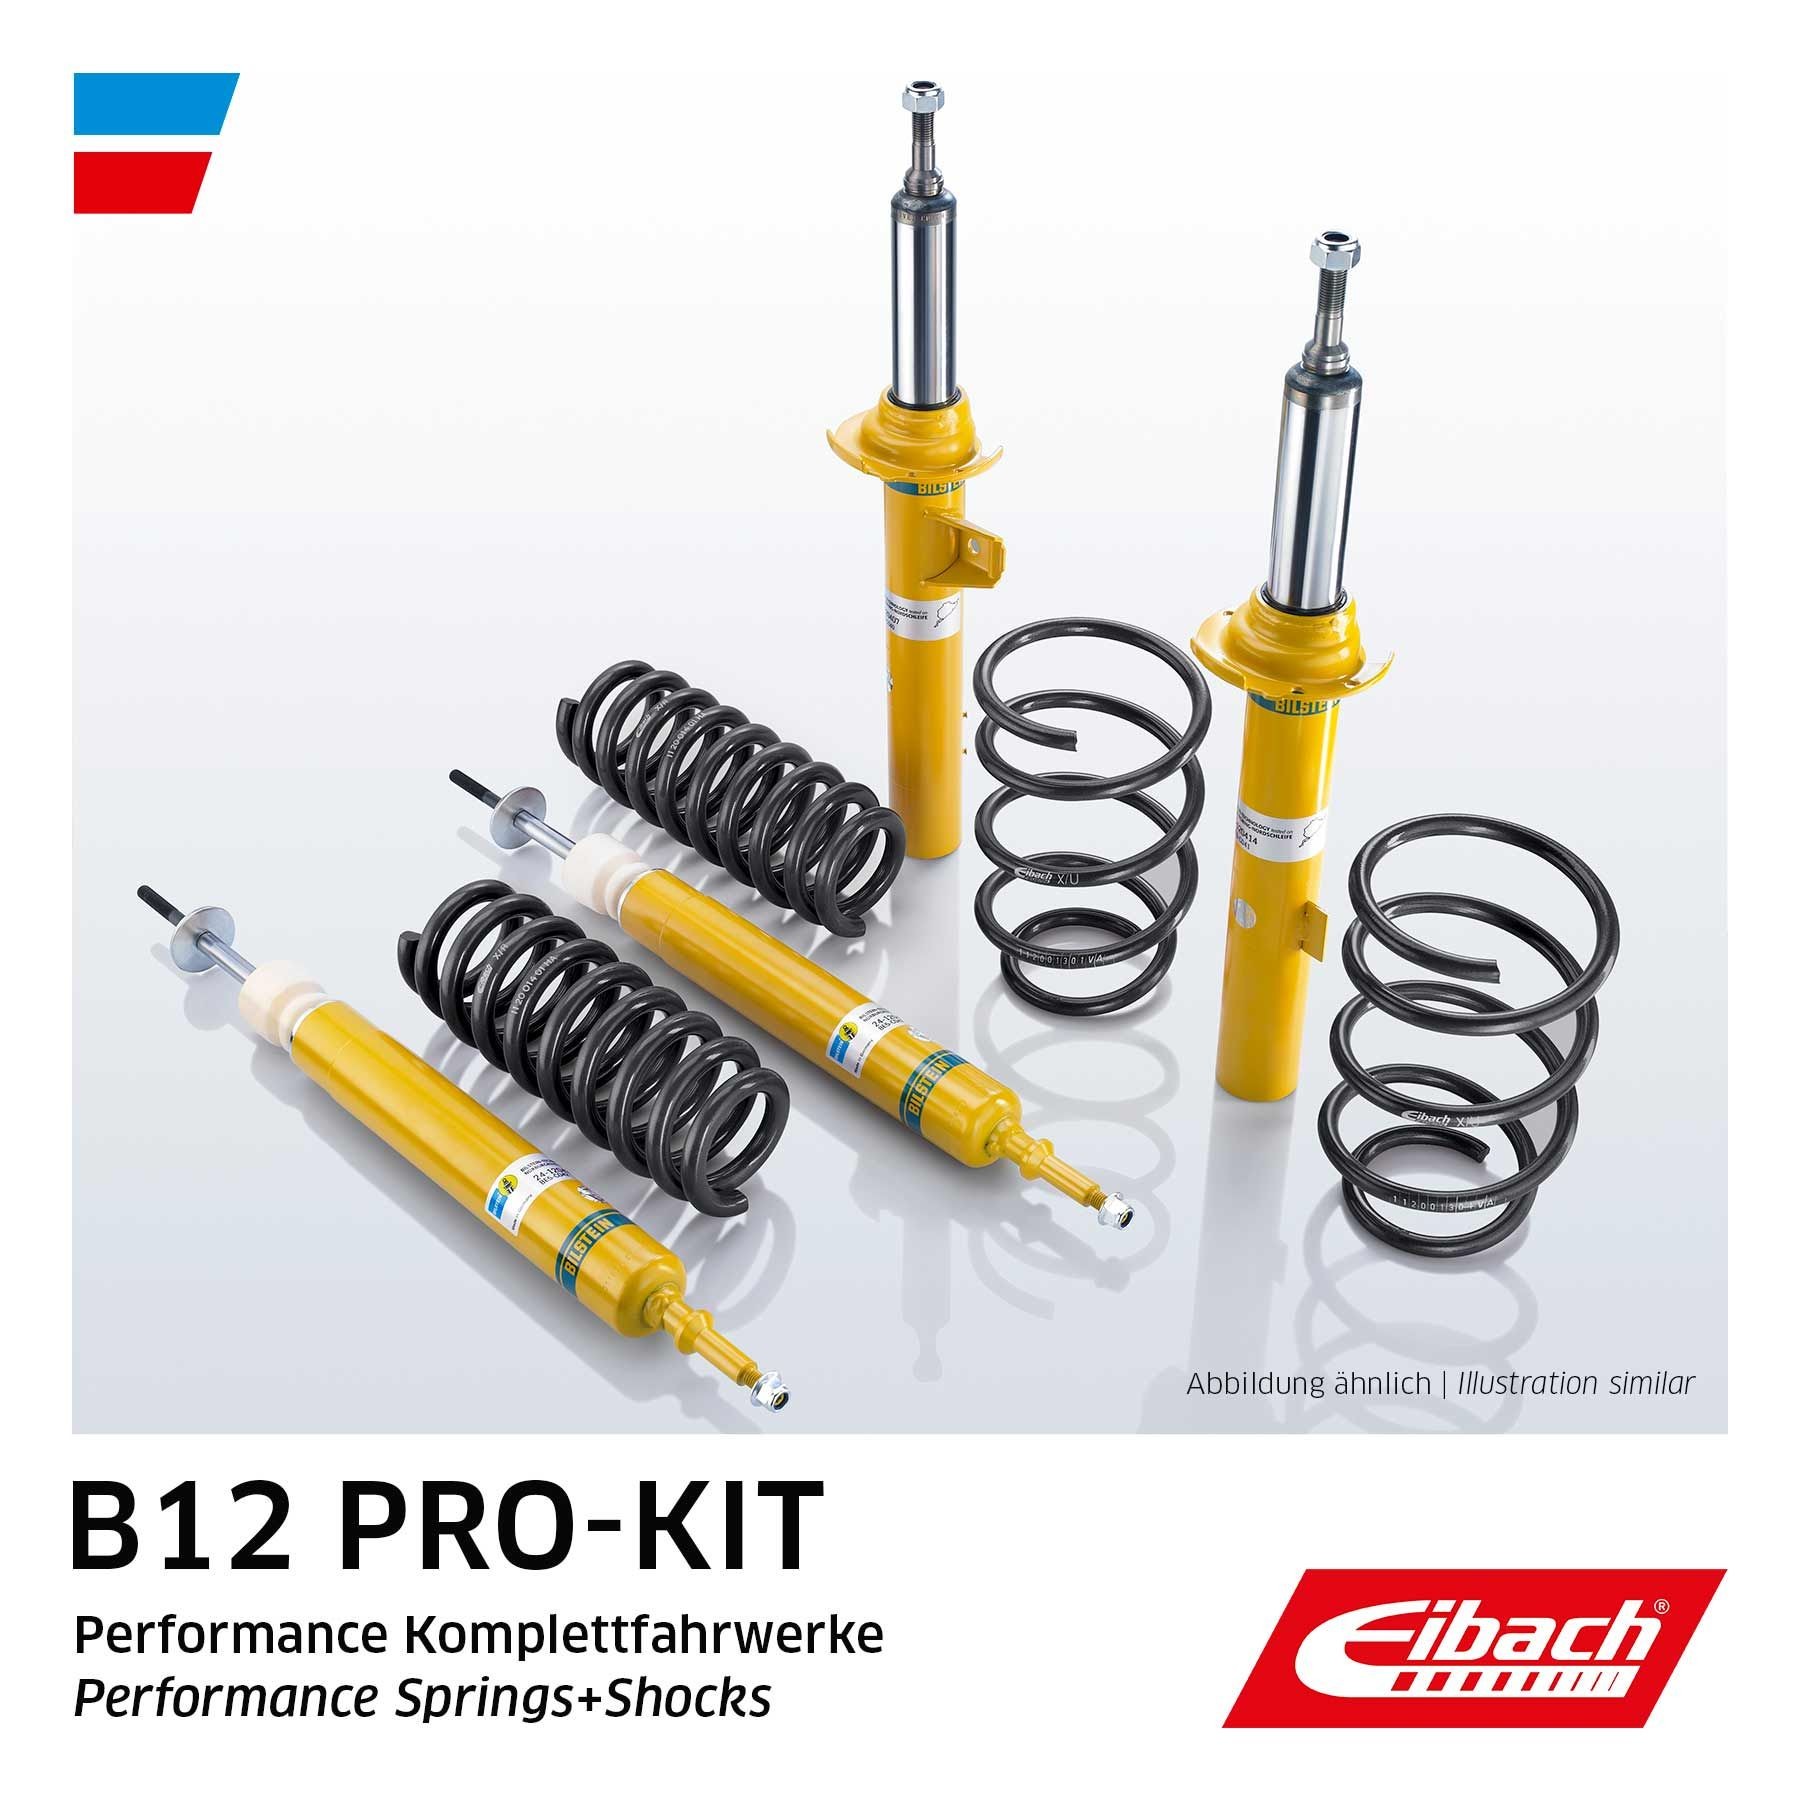 EIBACH E90-15-021-16-22 Suspension kit, coil springs / shock absorbers Audi A6 C6 Allroad